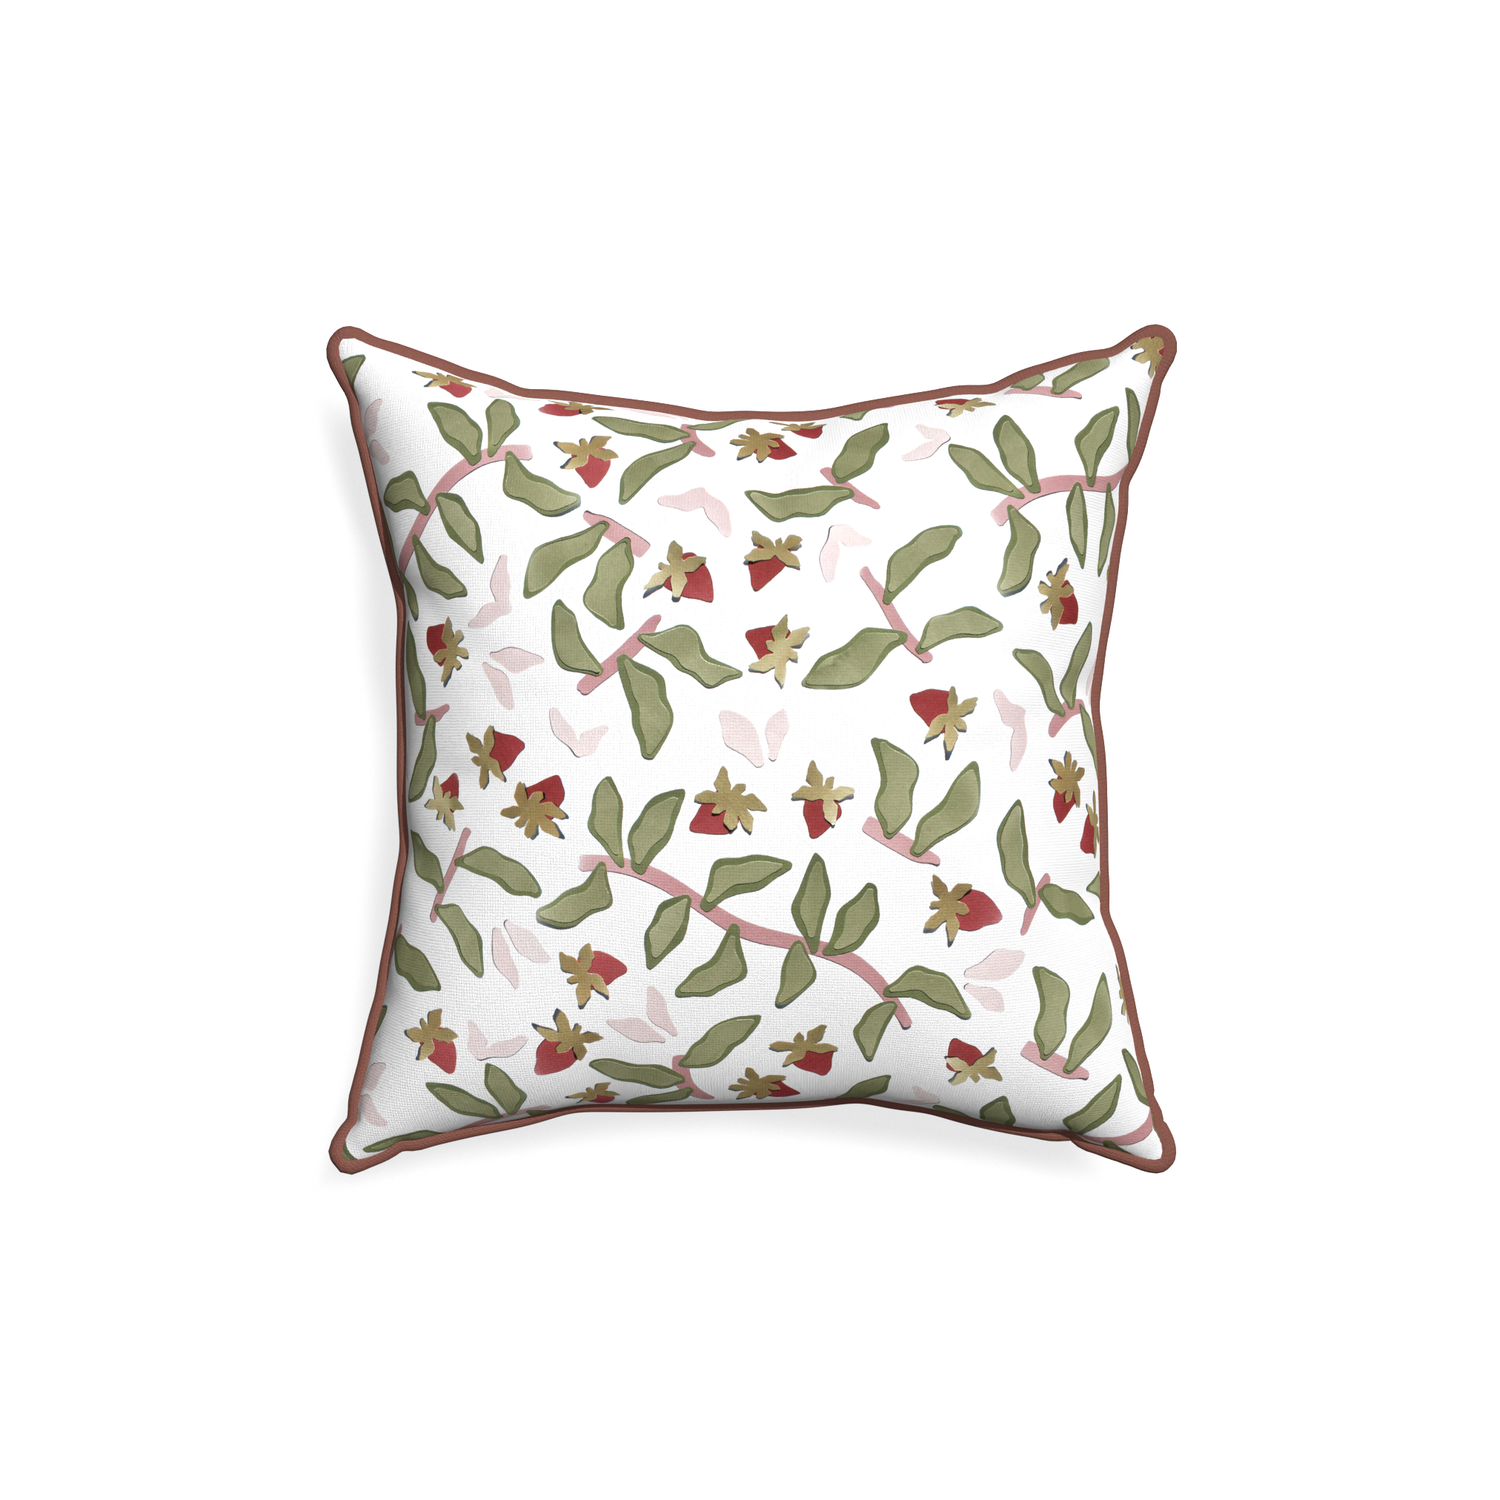 18-square nellie custom strawberry & botanicalpillow with w piping on white background